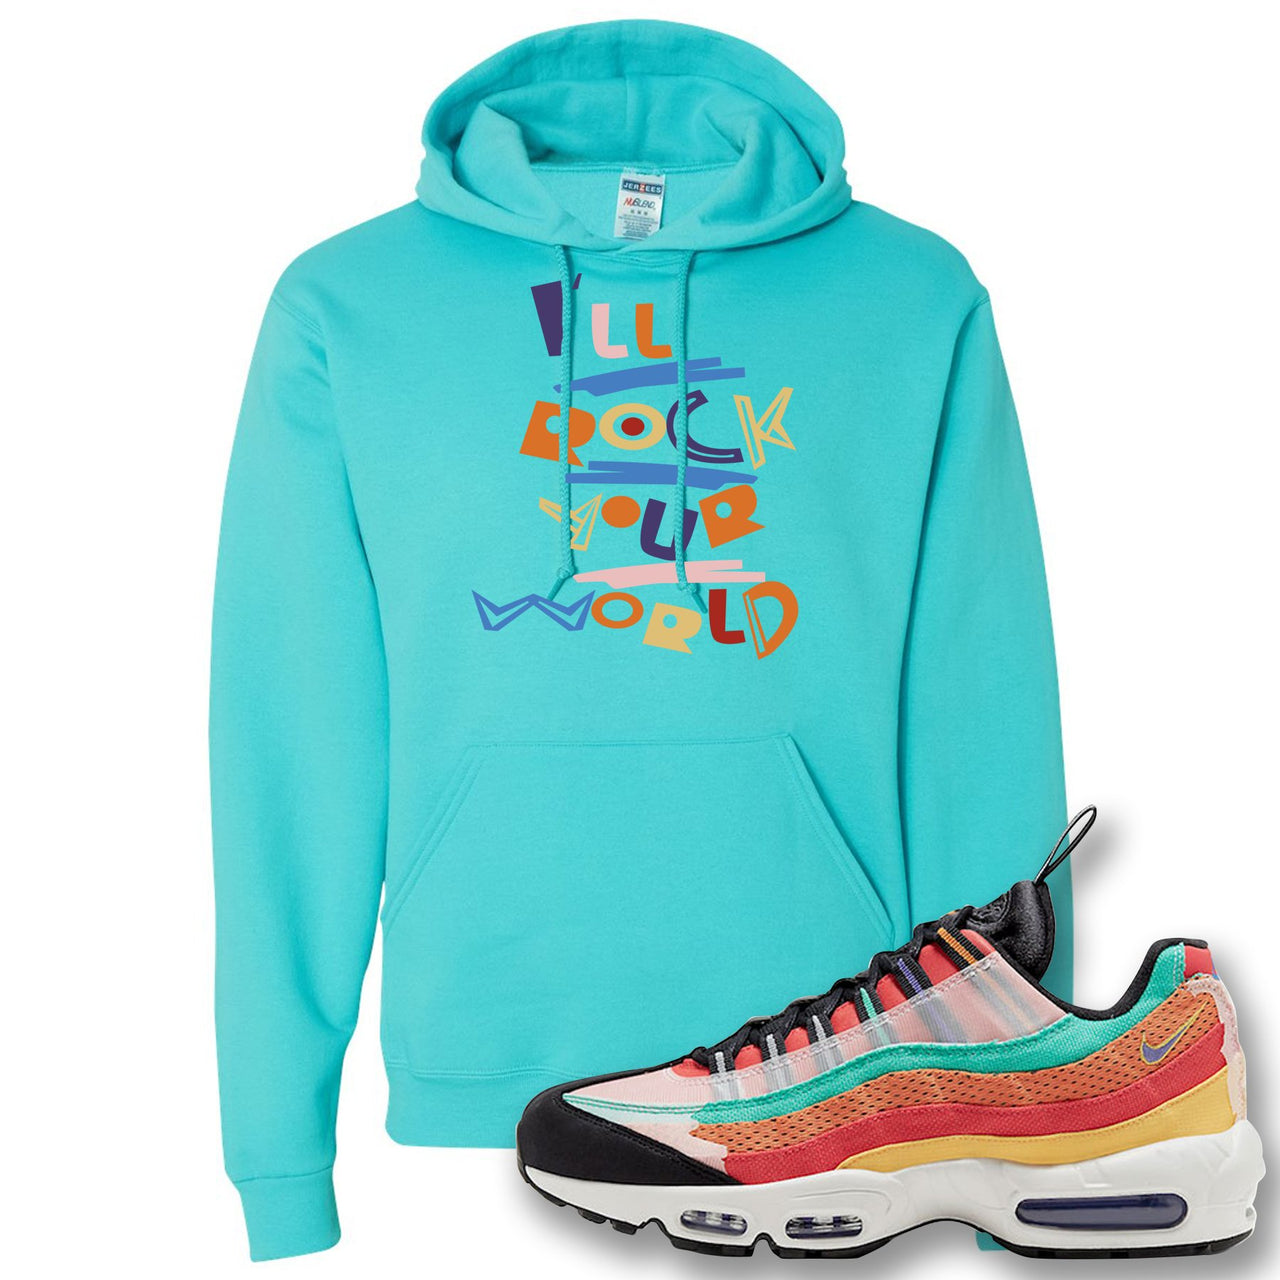 Air Max 95 Black History Month Sneaker Scuba Blue Pullover Hoodie | Hoodie to match Nike Air Max 95 Black History Month Shoes | I'll Rock Your World